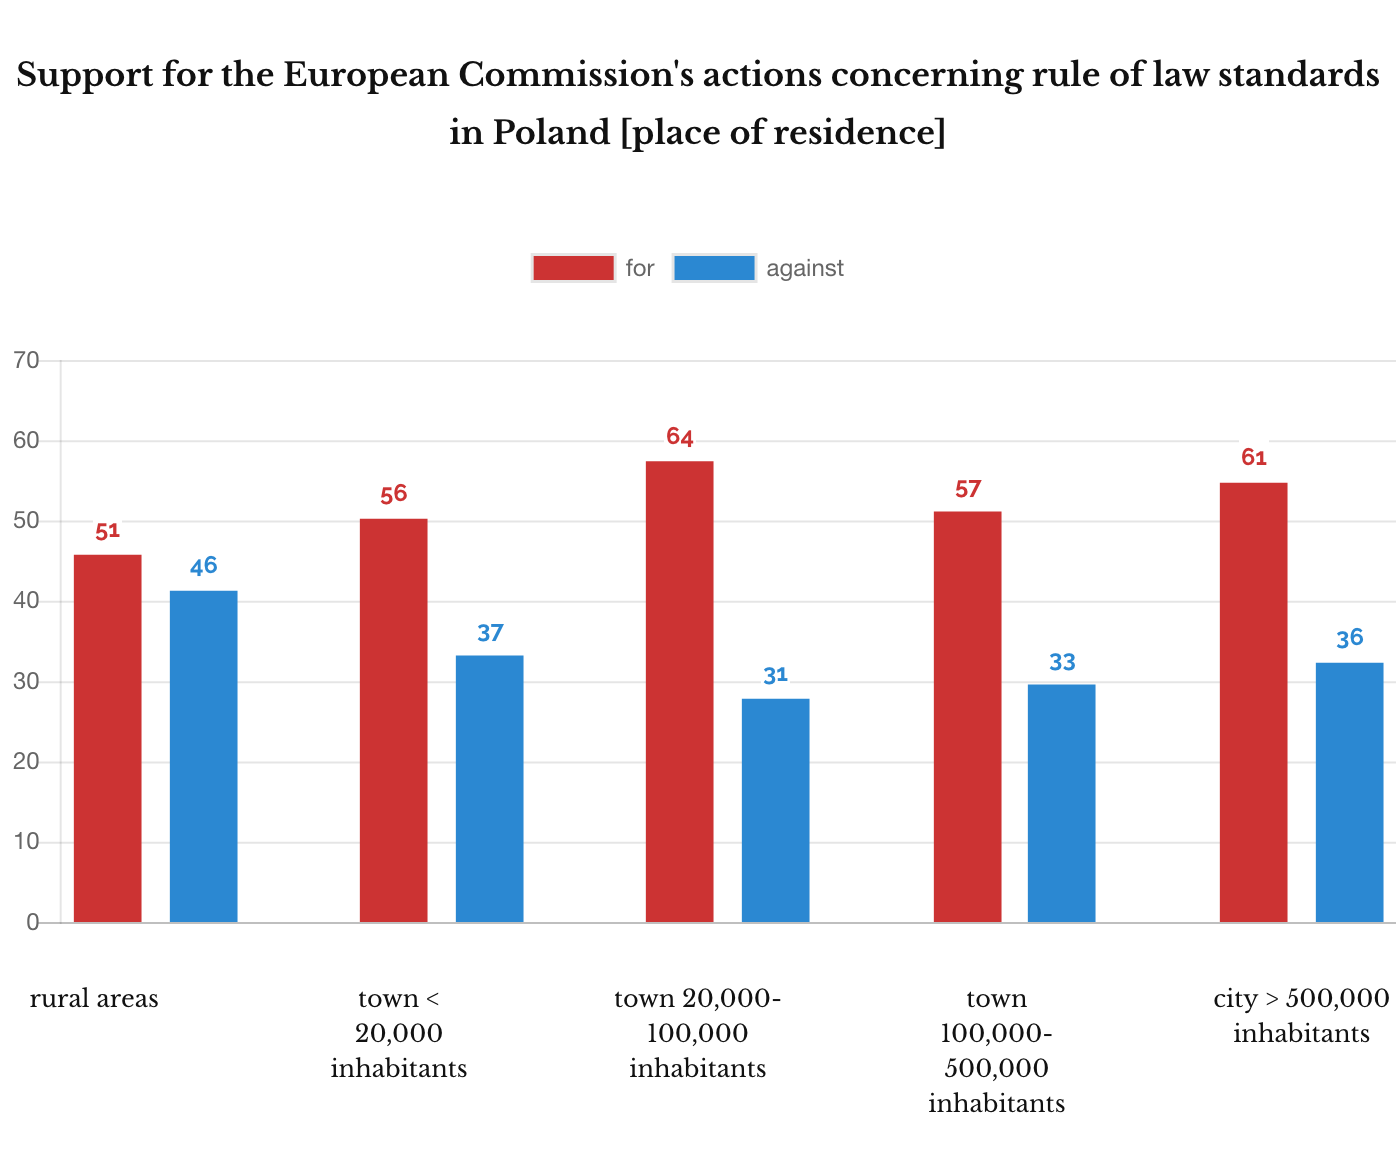 IPSOS December 2018. Support for the European Commission's actions concerning rule of law in Poland [place of residence]